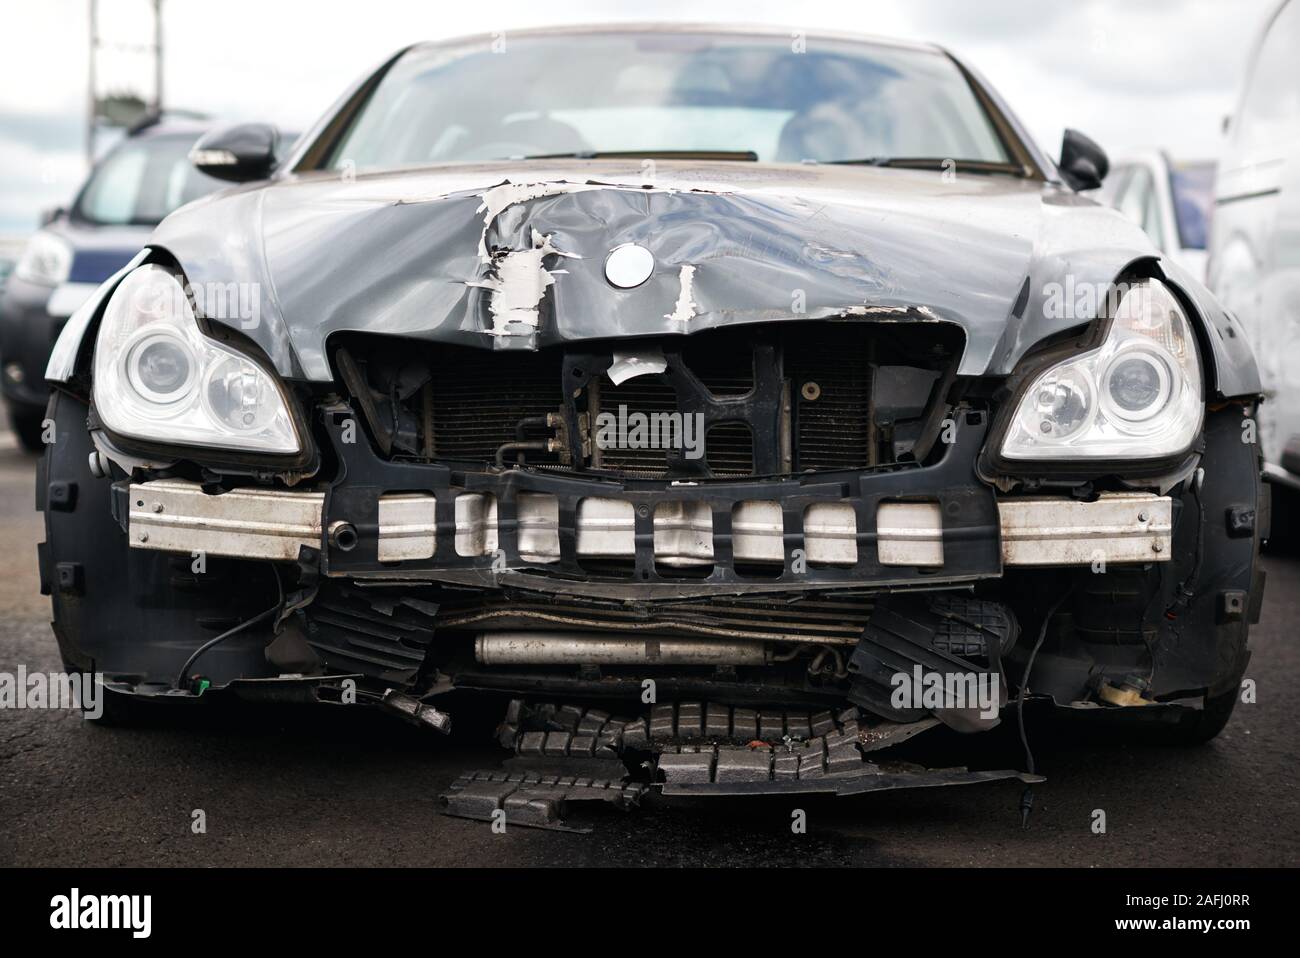 Detail Of Car Damaged In Motor Vehicle Accident Parked In Garage Repair Shop Stock Photo